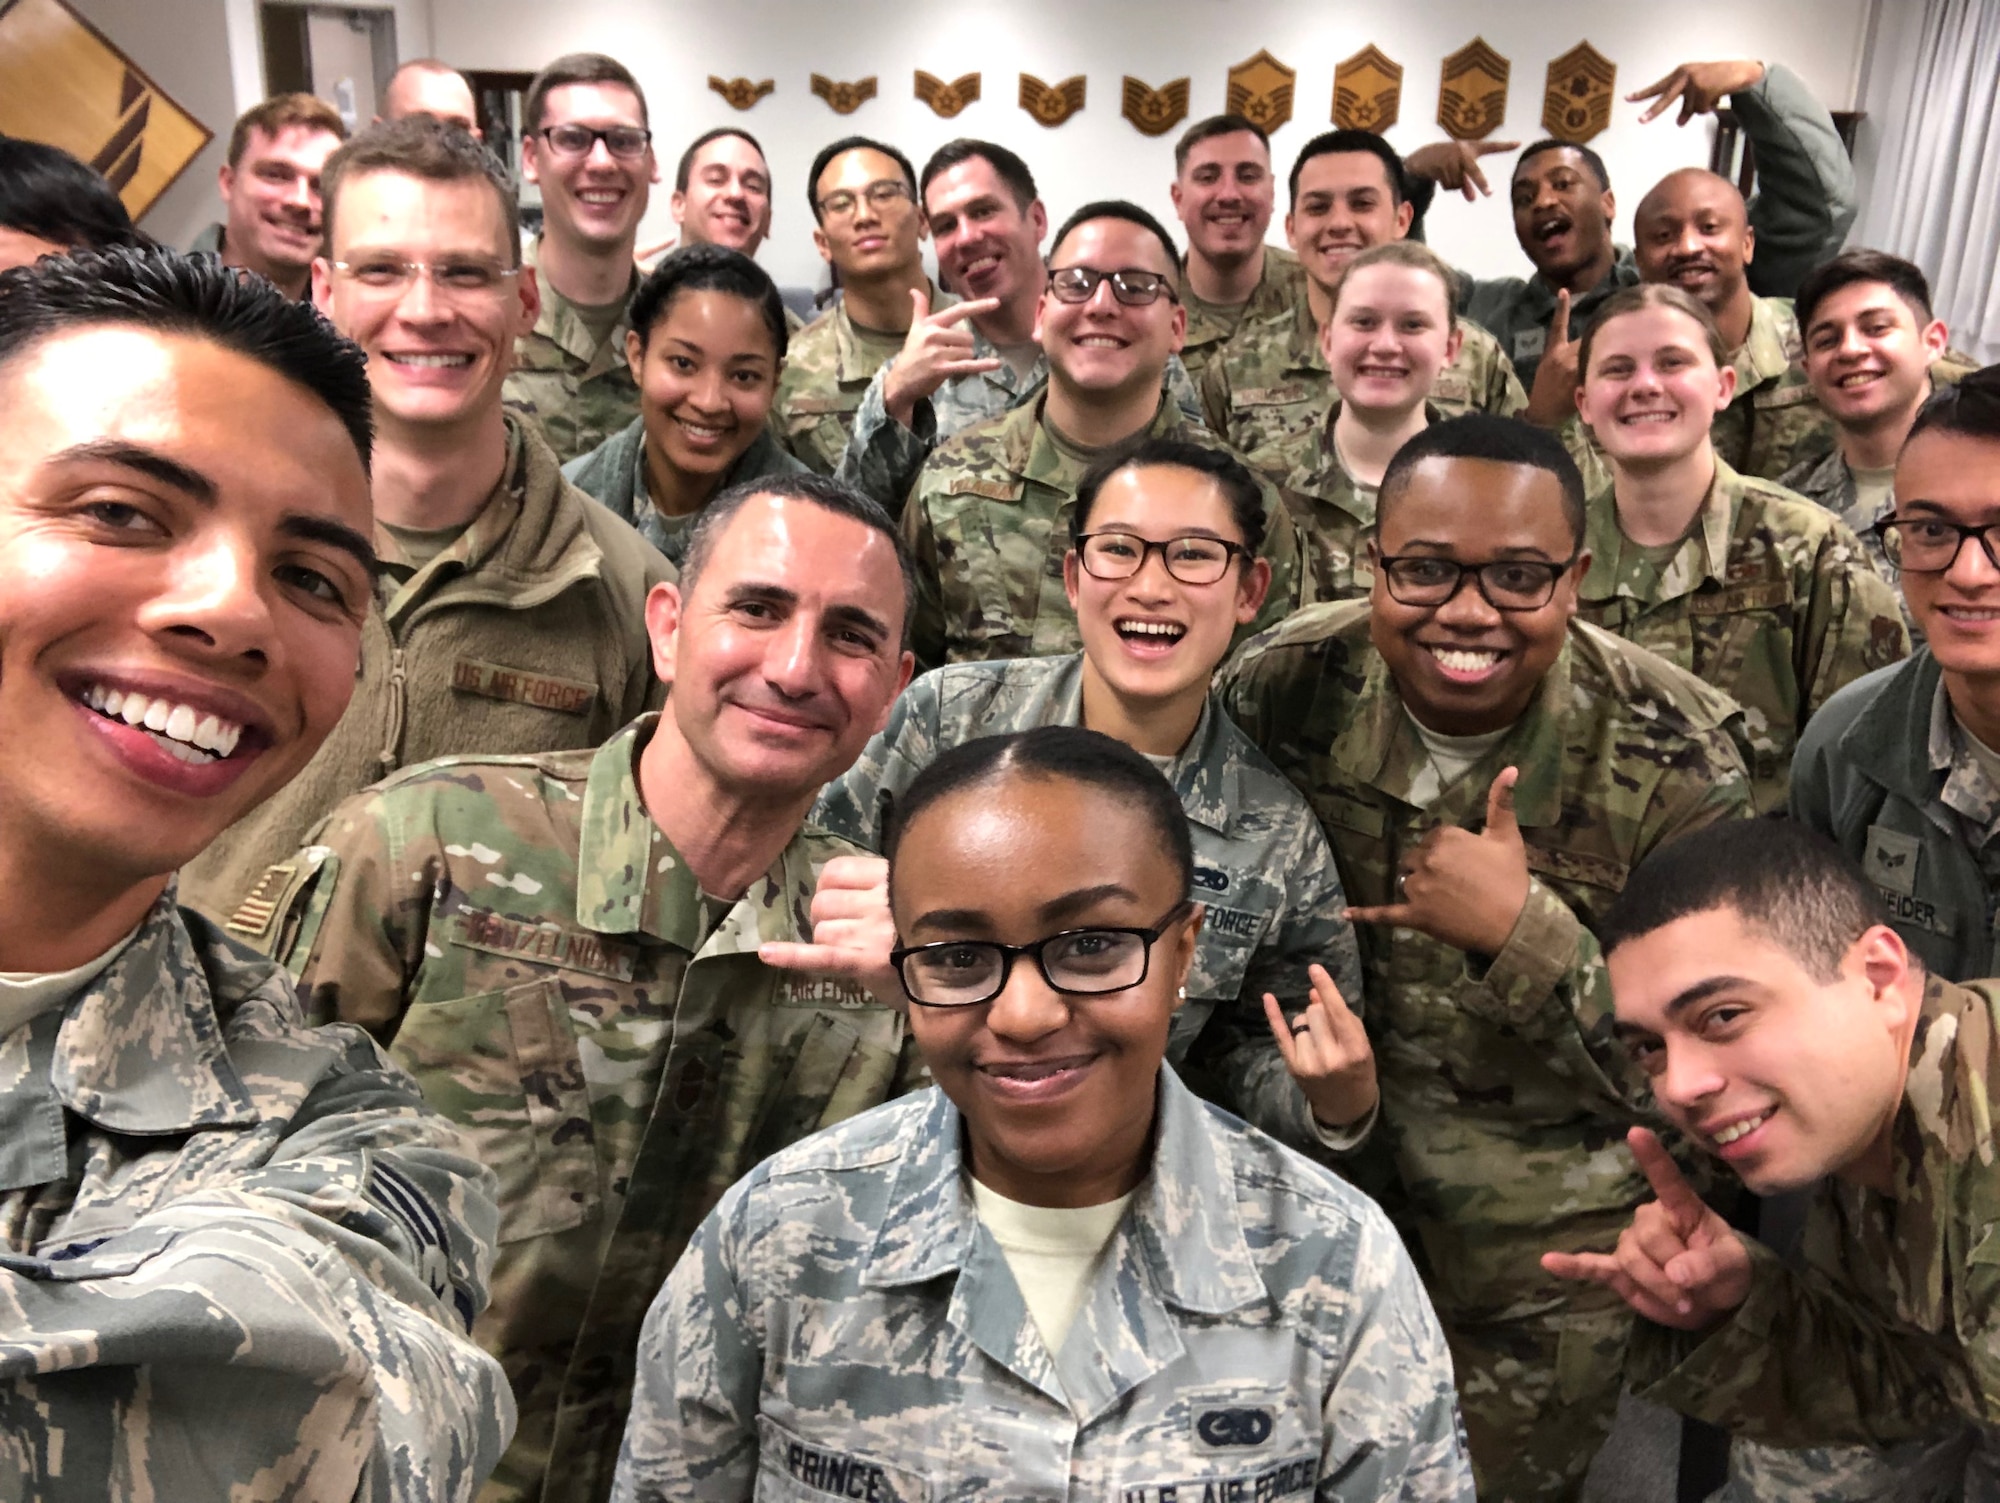 Chief Master Sgt. Brian Kruzelnick, command chief of Air Mobility Command, takes a selfie with Airman Leadership School students at Misawa Air Base, Japan. Kruzelnick served as the Fifth Air Force command chief from December 2018 to August 2020. (Courtesy photo)